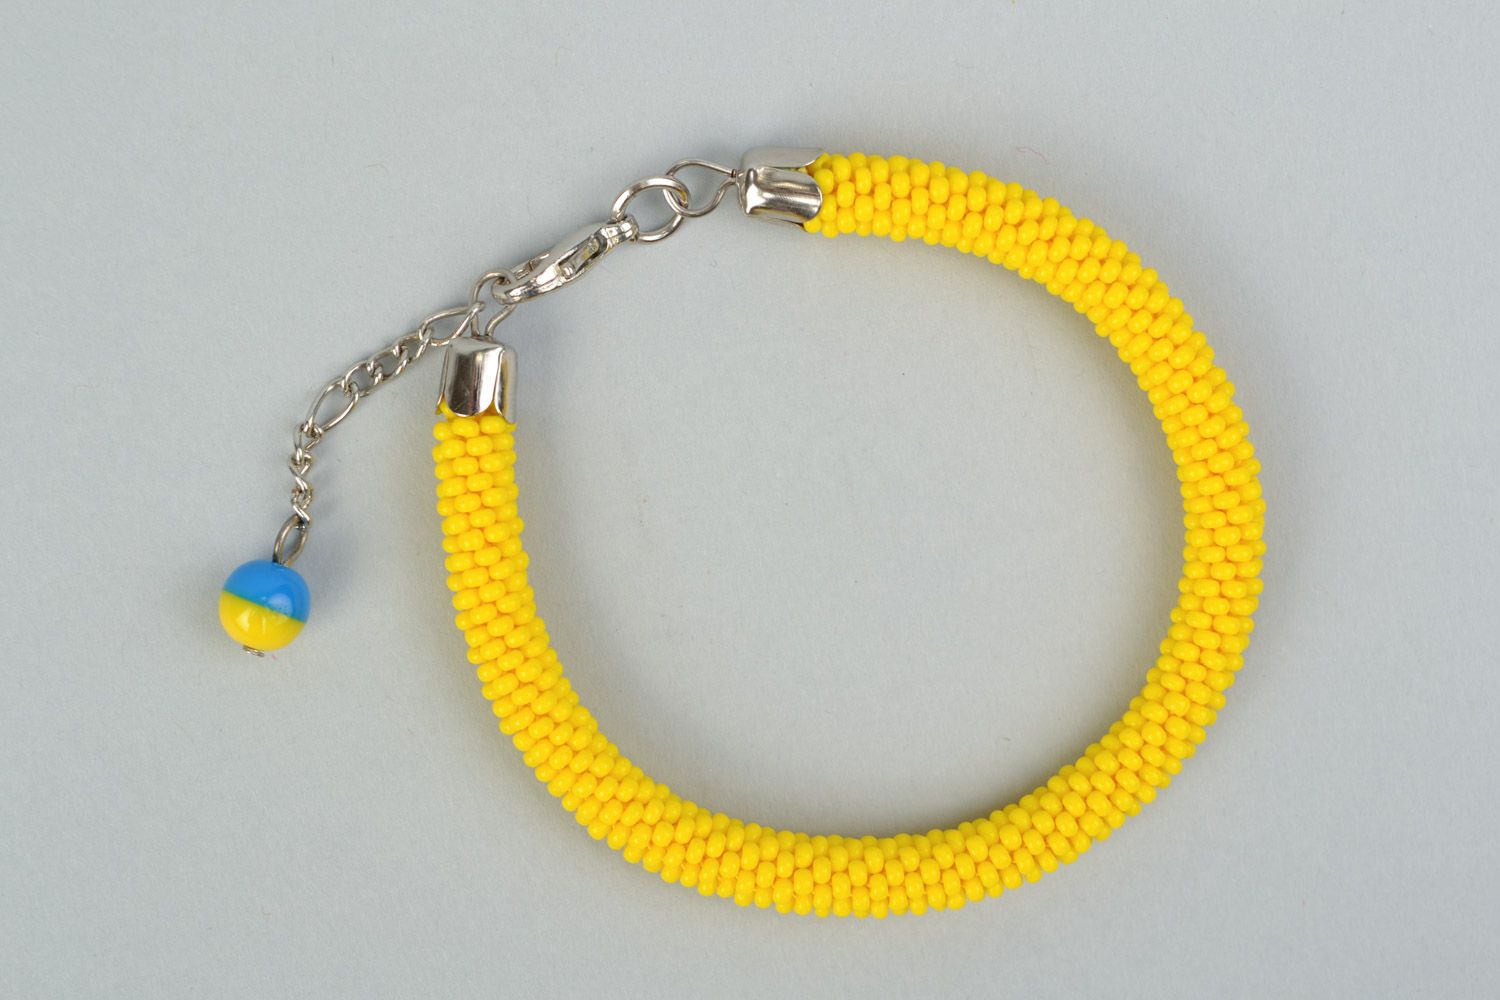 Handmade cord bracelet crocheted of bright yellow Czech beads with blue charm photo 4